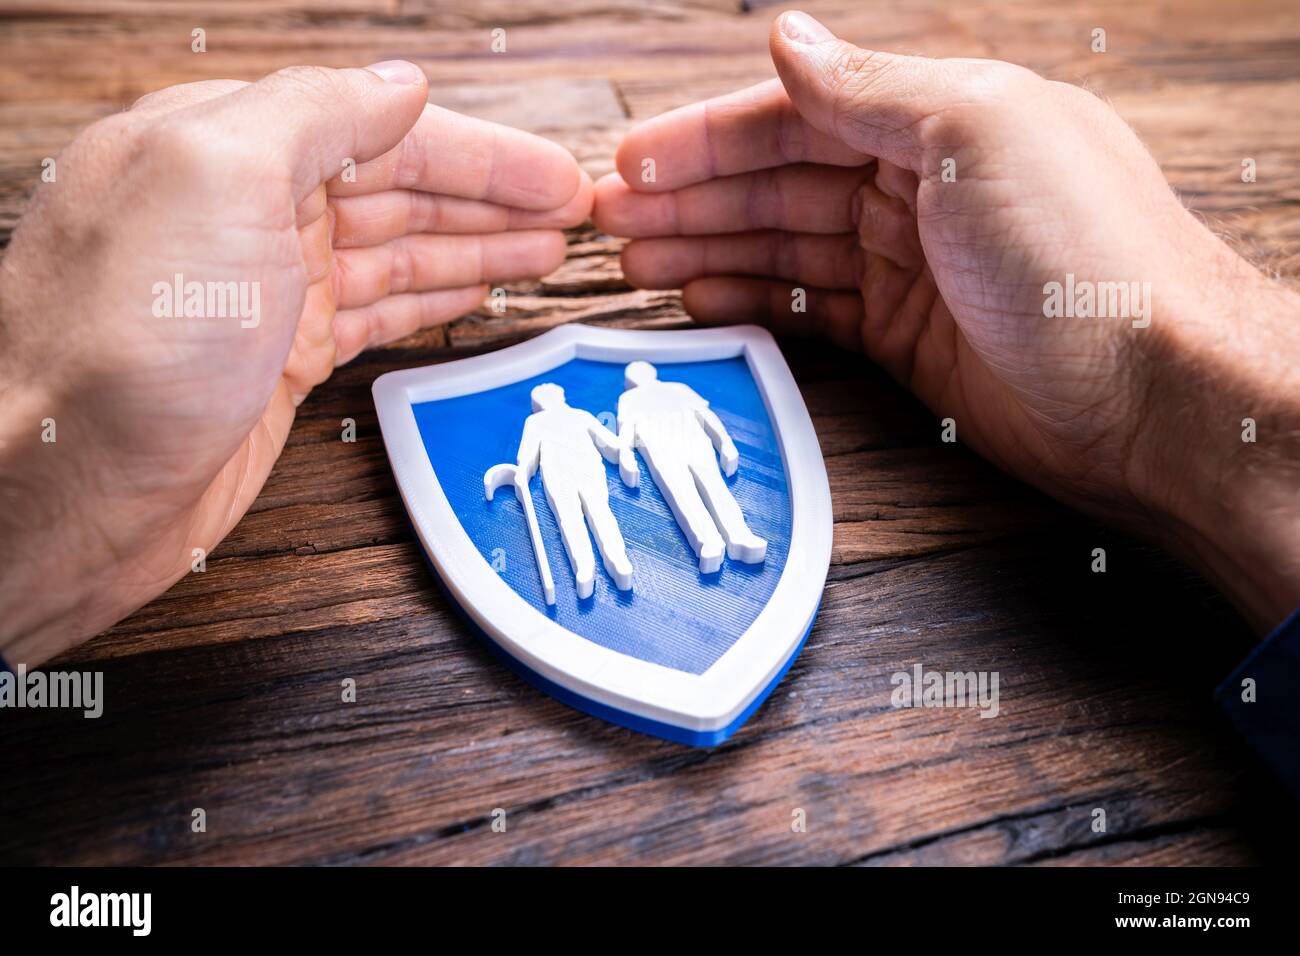 401k Pension And Retire Money Protection. Secure Retirement Plan Stock Photo